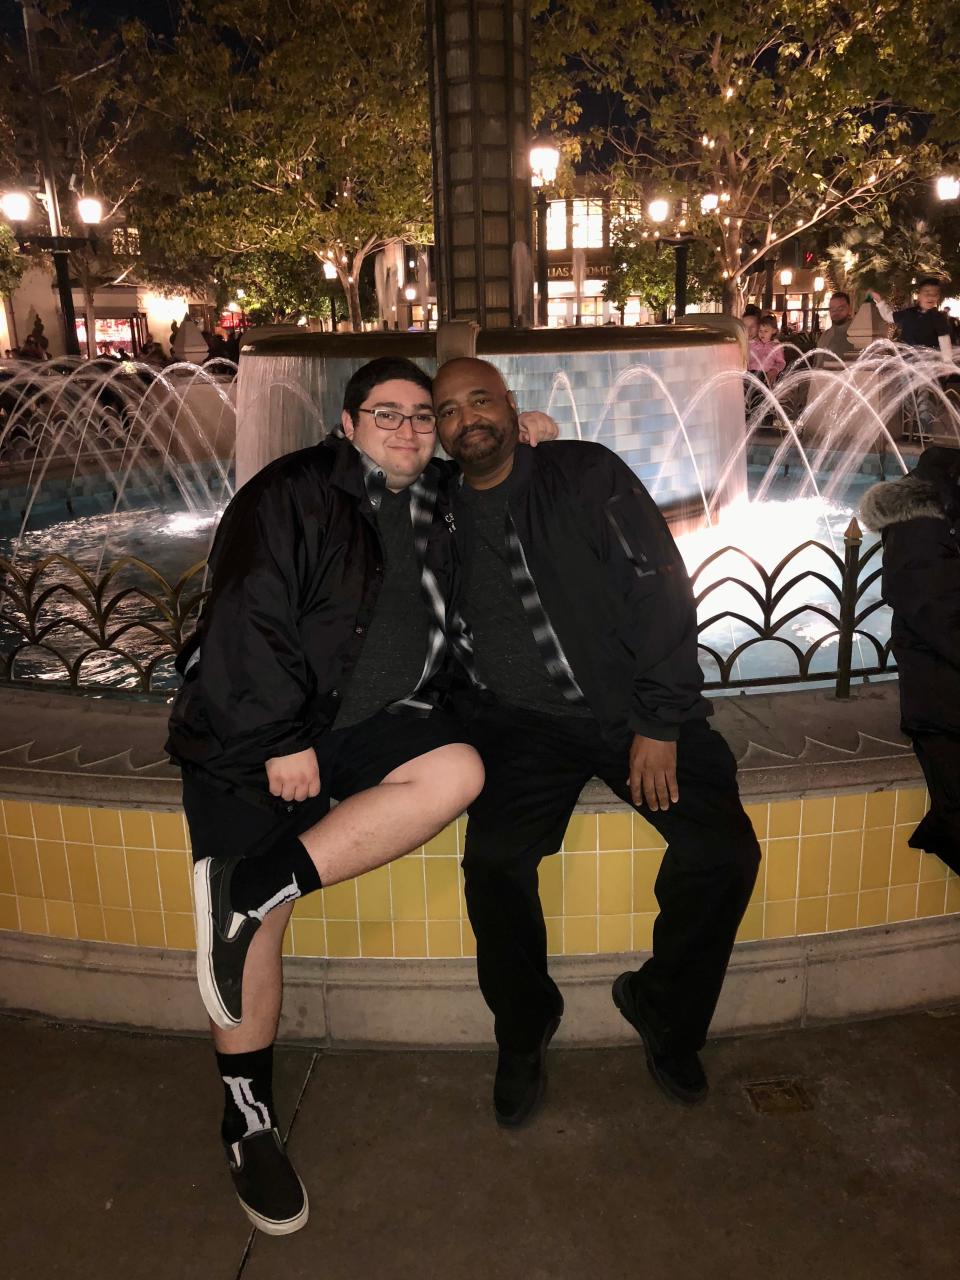 The author (left) and his partner, sitting on the edge of a fountain at night.